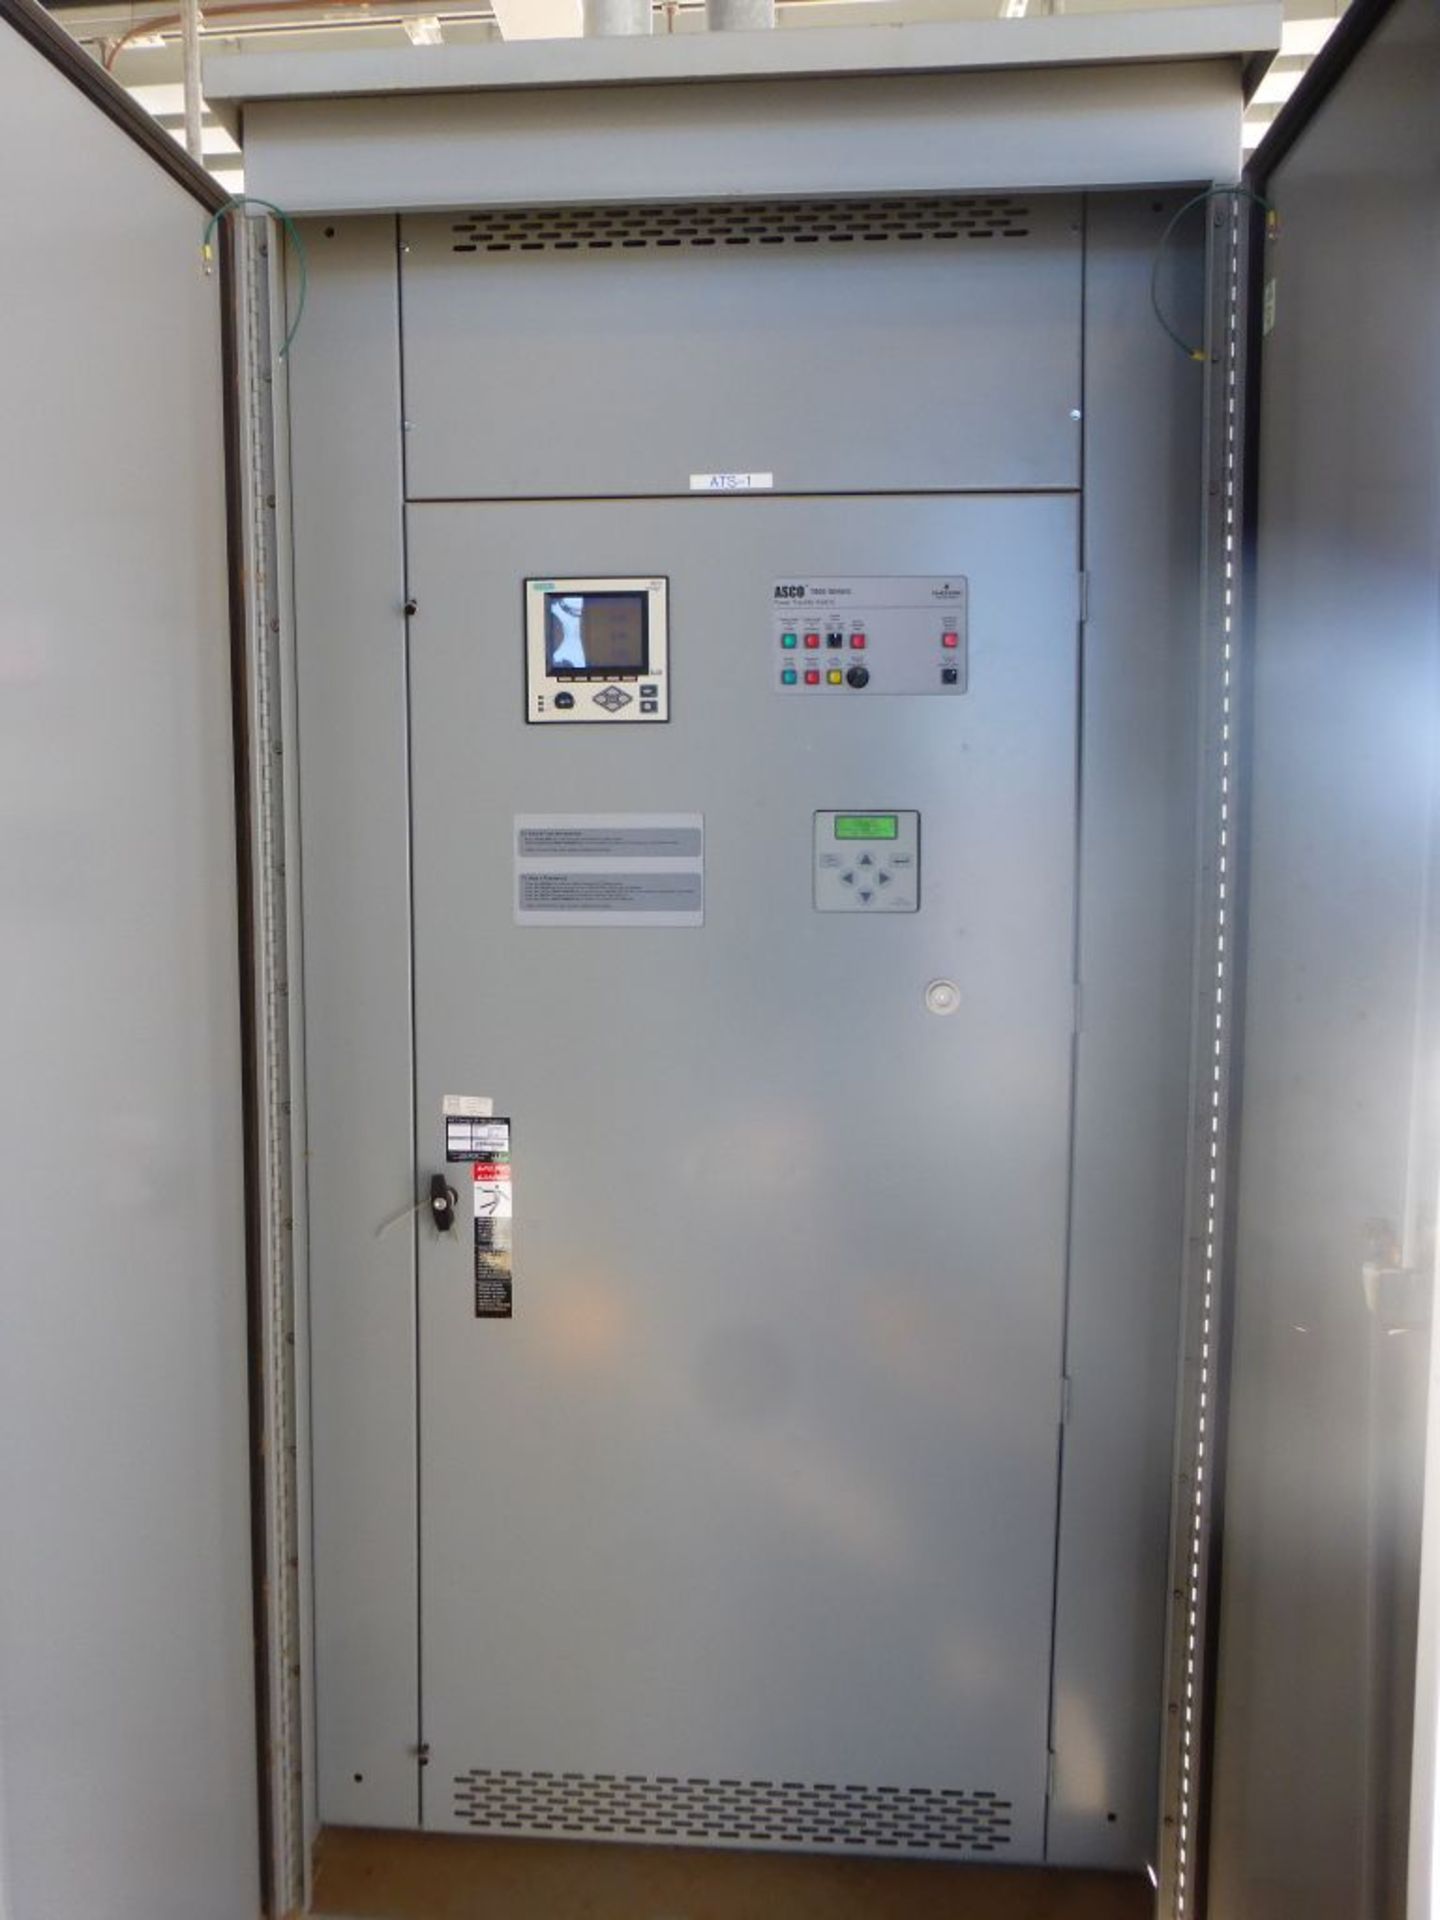 ASCO 7000 Series Power Transfer Switch | Lot Loading Fee: $50 | 800A; 480V; Tag: 233664 - Image 4 of 12